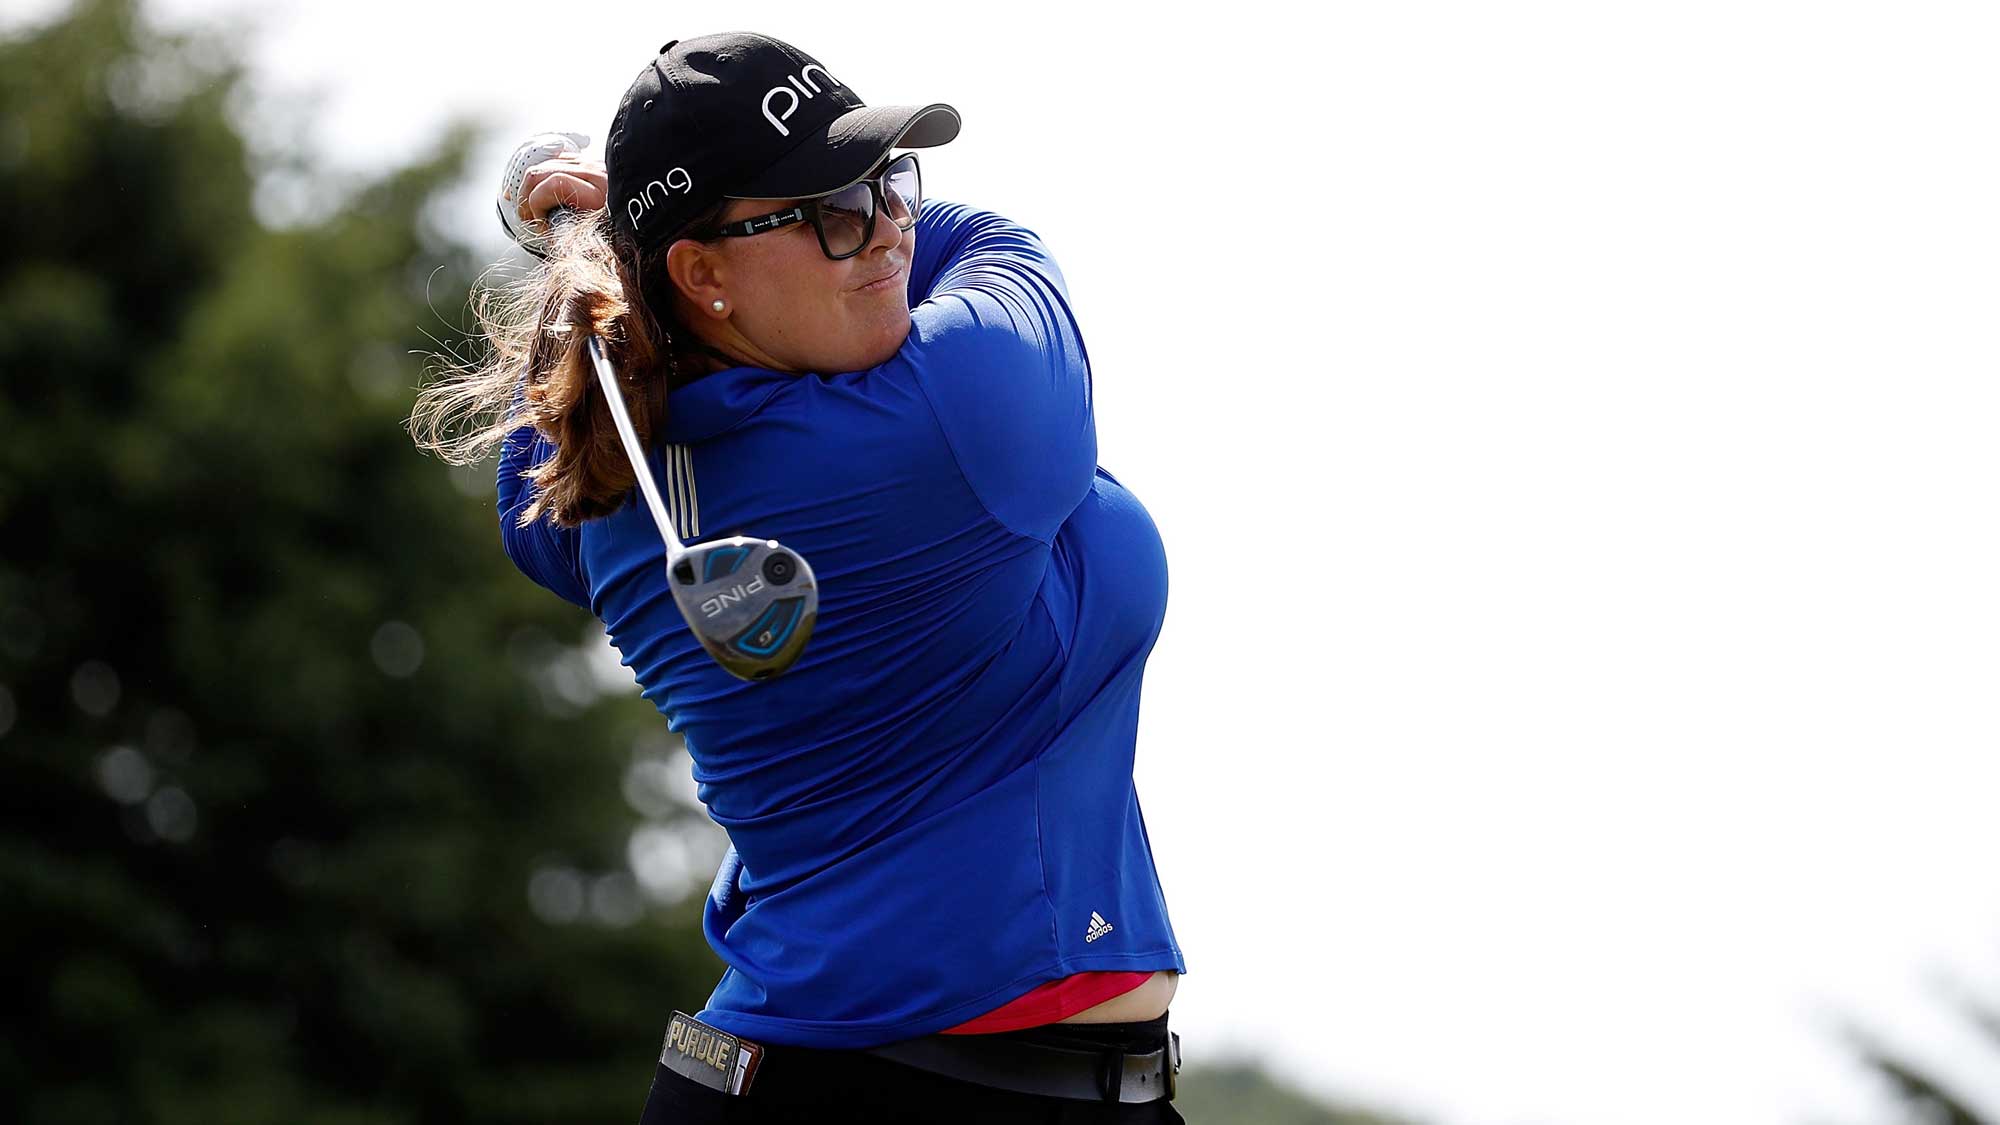 Laura Gonzalez Escallon of Belgium hits her tee shot on the seventh hole during the first round of the Thornberry Creek LPGA Classic